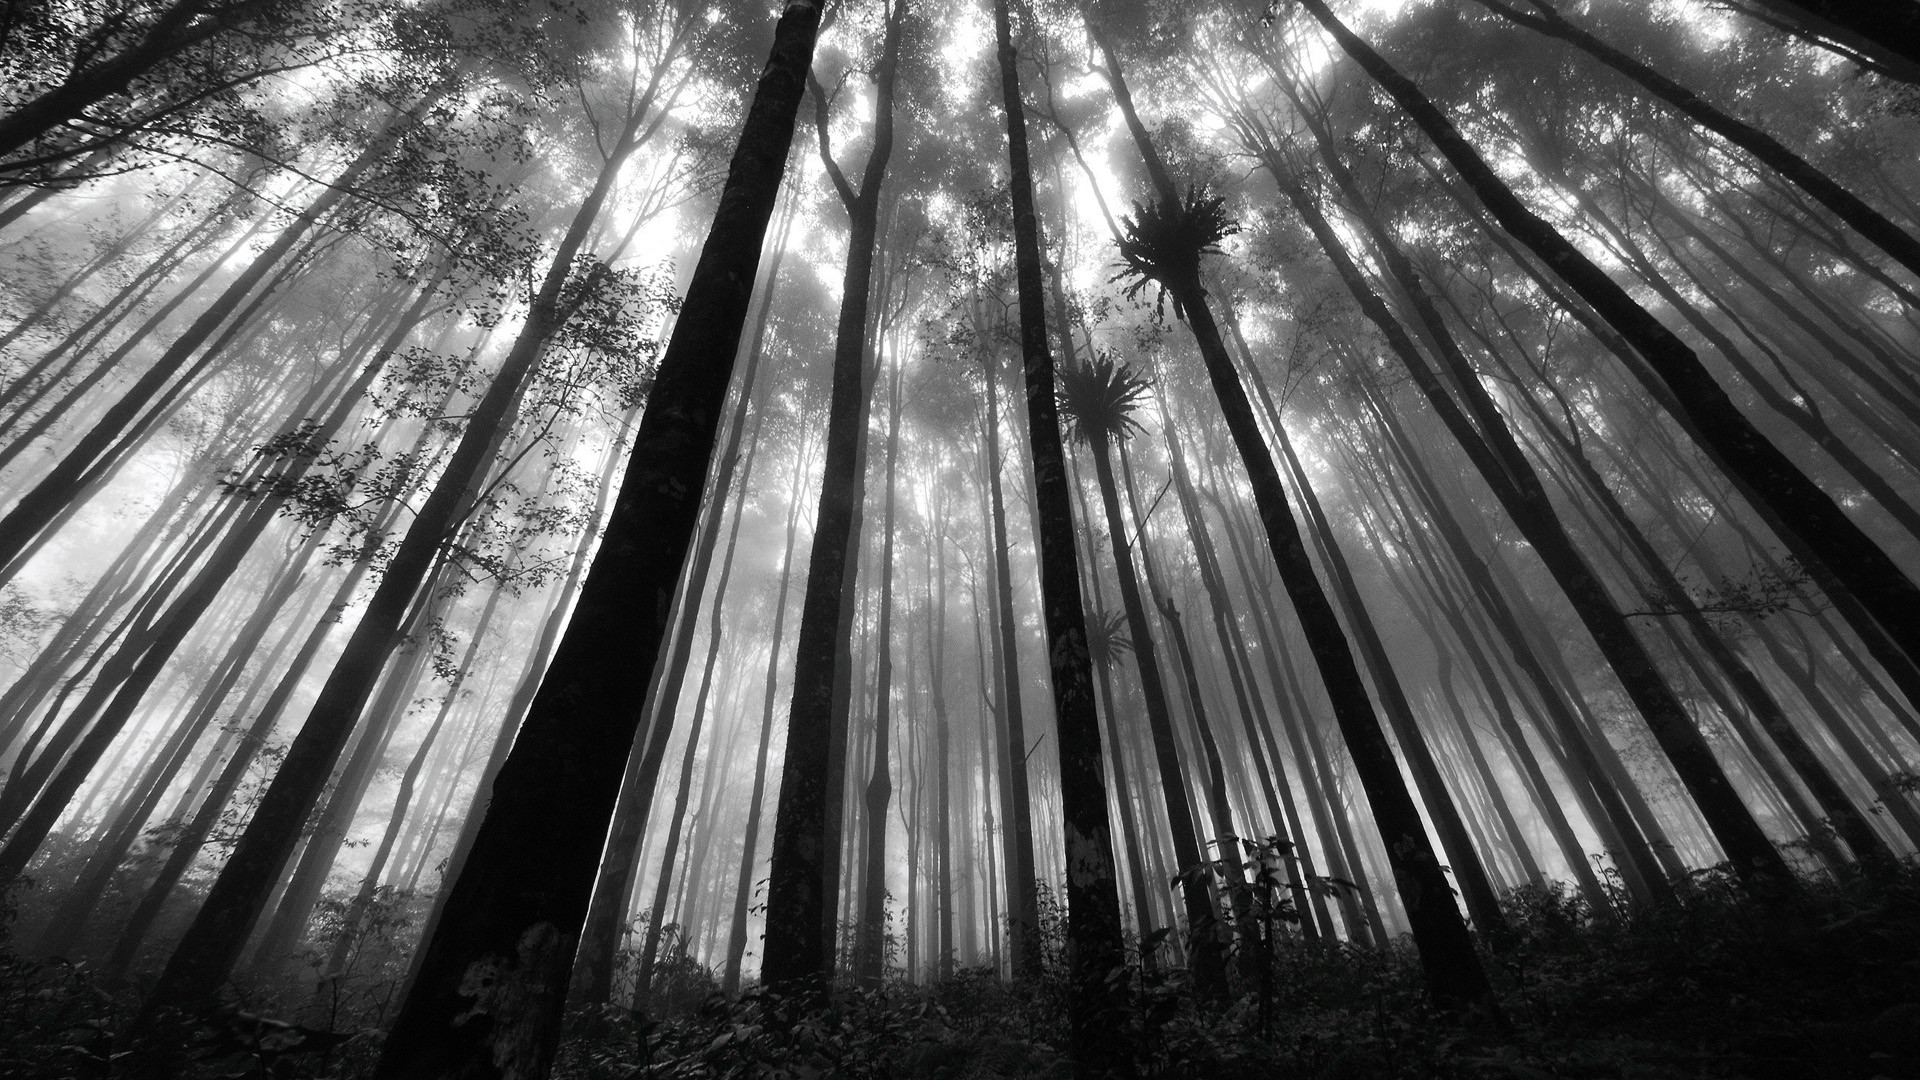 Black And White Pictures Anime Forest 3 Wide Wallpaper. Black And White Pictures Anime Forest 3 Wide Wallpaper